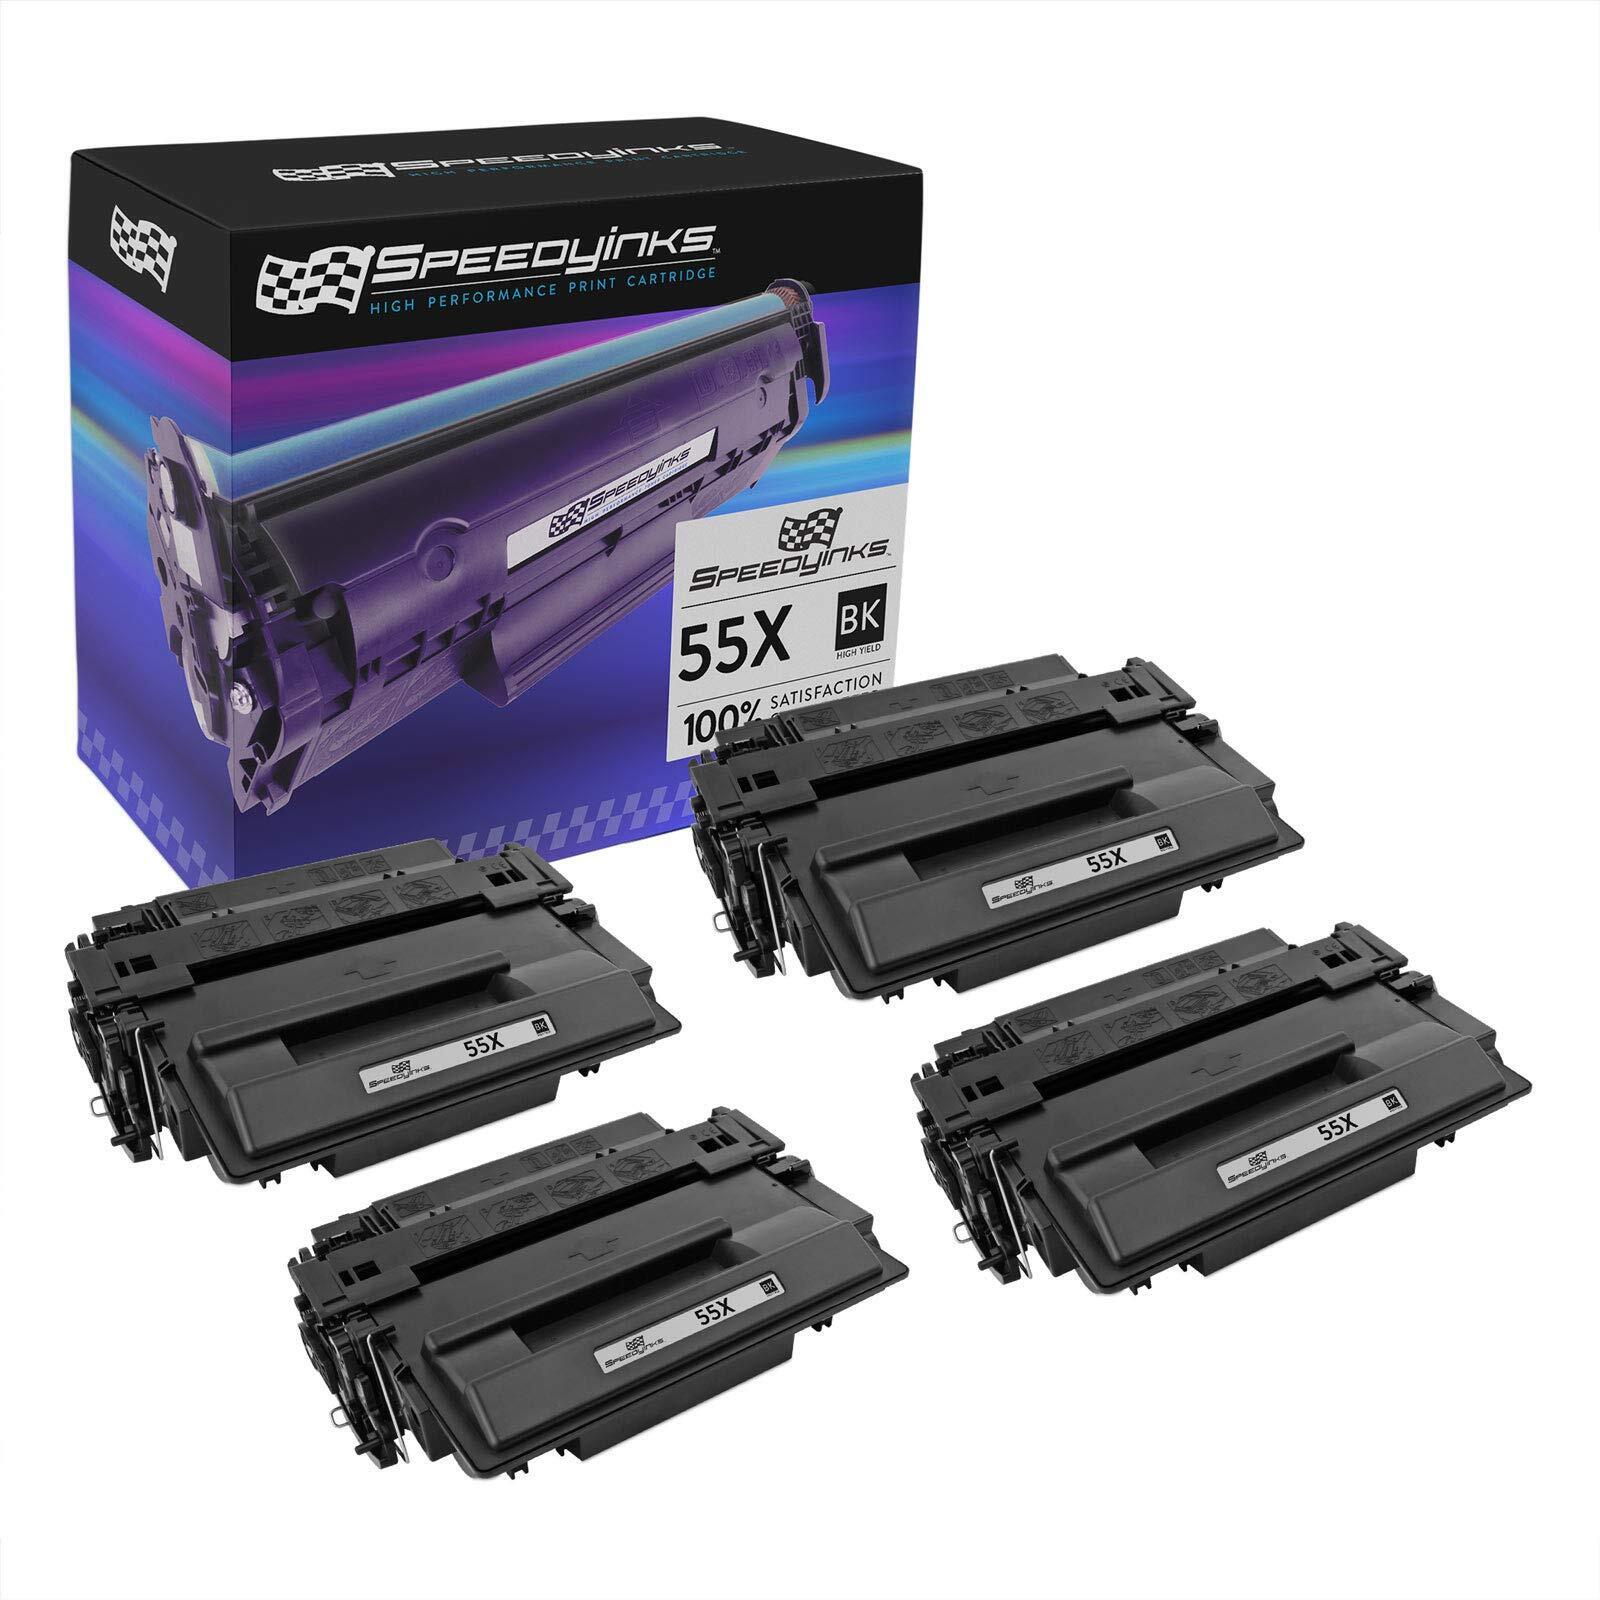 SPEEDYINKS Compatible Replacement for HP 55X 55A CE255X Toner Cartridge 4PK